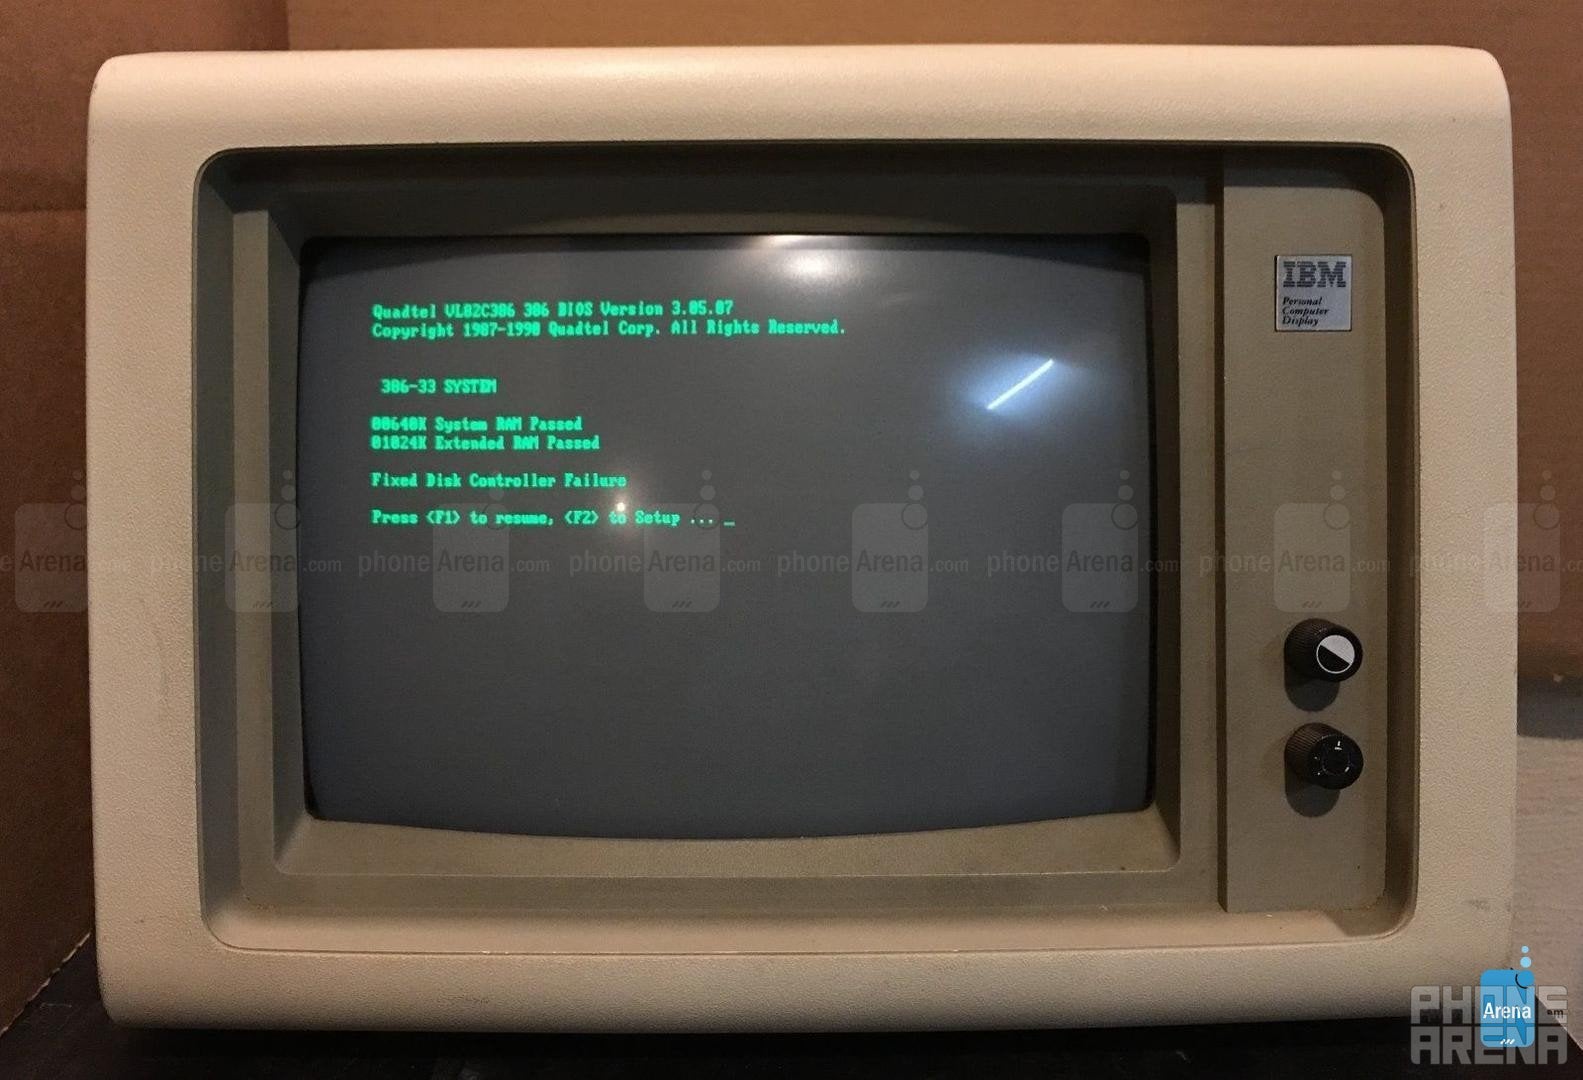 Dark mode nostalgia - IBM 5151 monochrome monitor - The pros and cons of Dark Mode: Here&#039;s when to use it and why